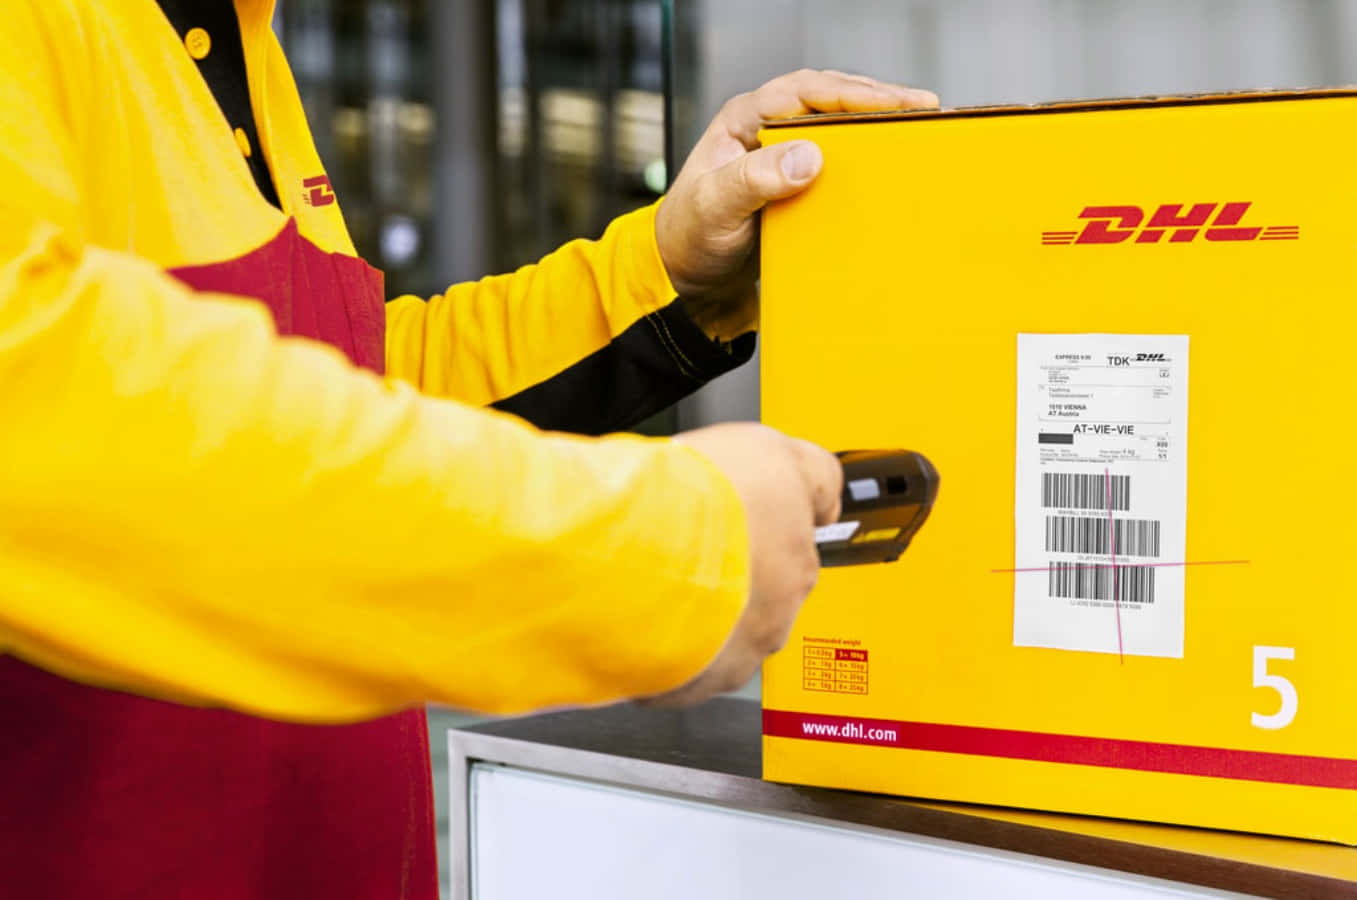 Get connected with DHL, the world’s leading mail and express delivery service